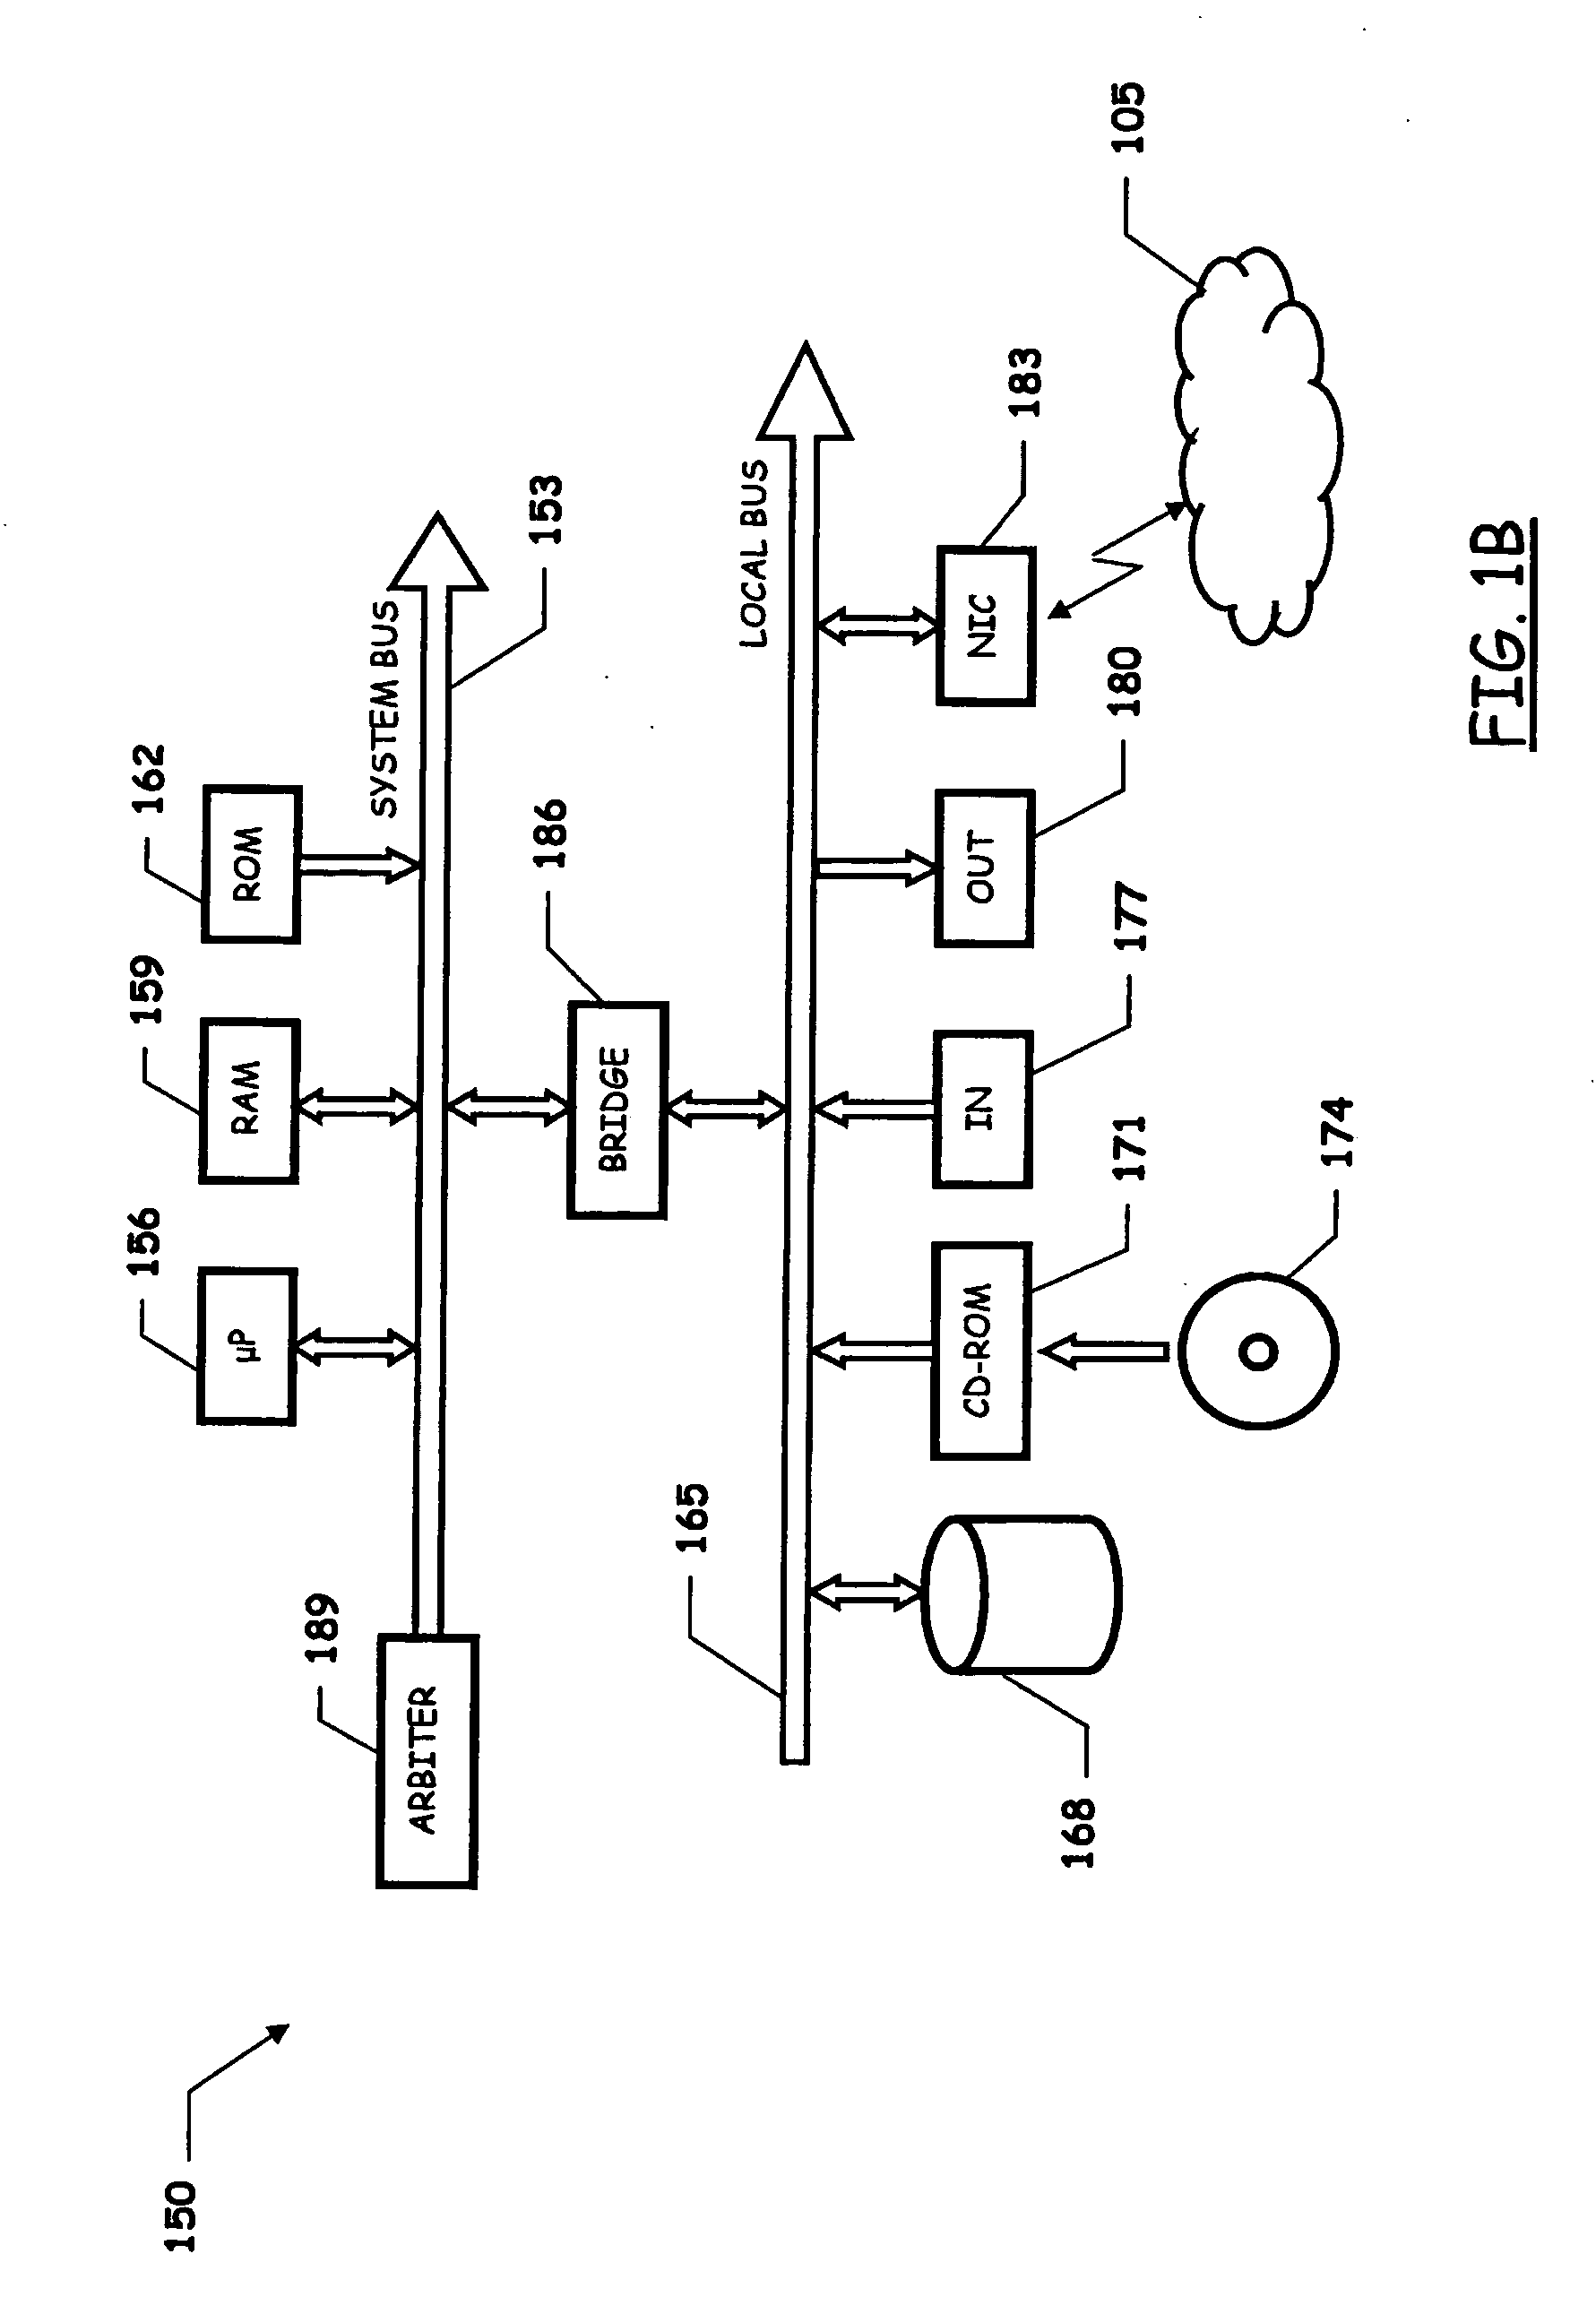 Method and system for scheduling jobs based on predefined, re-usable profiles